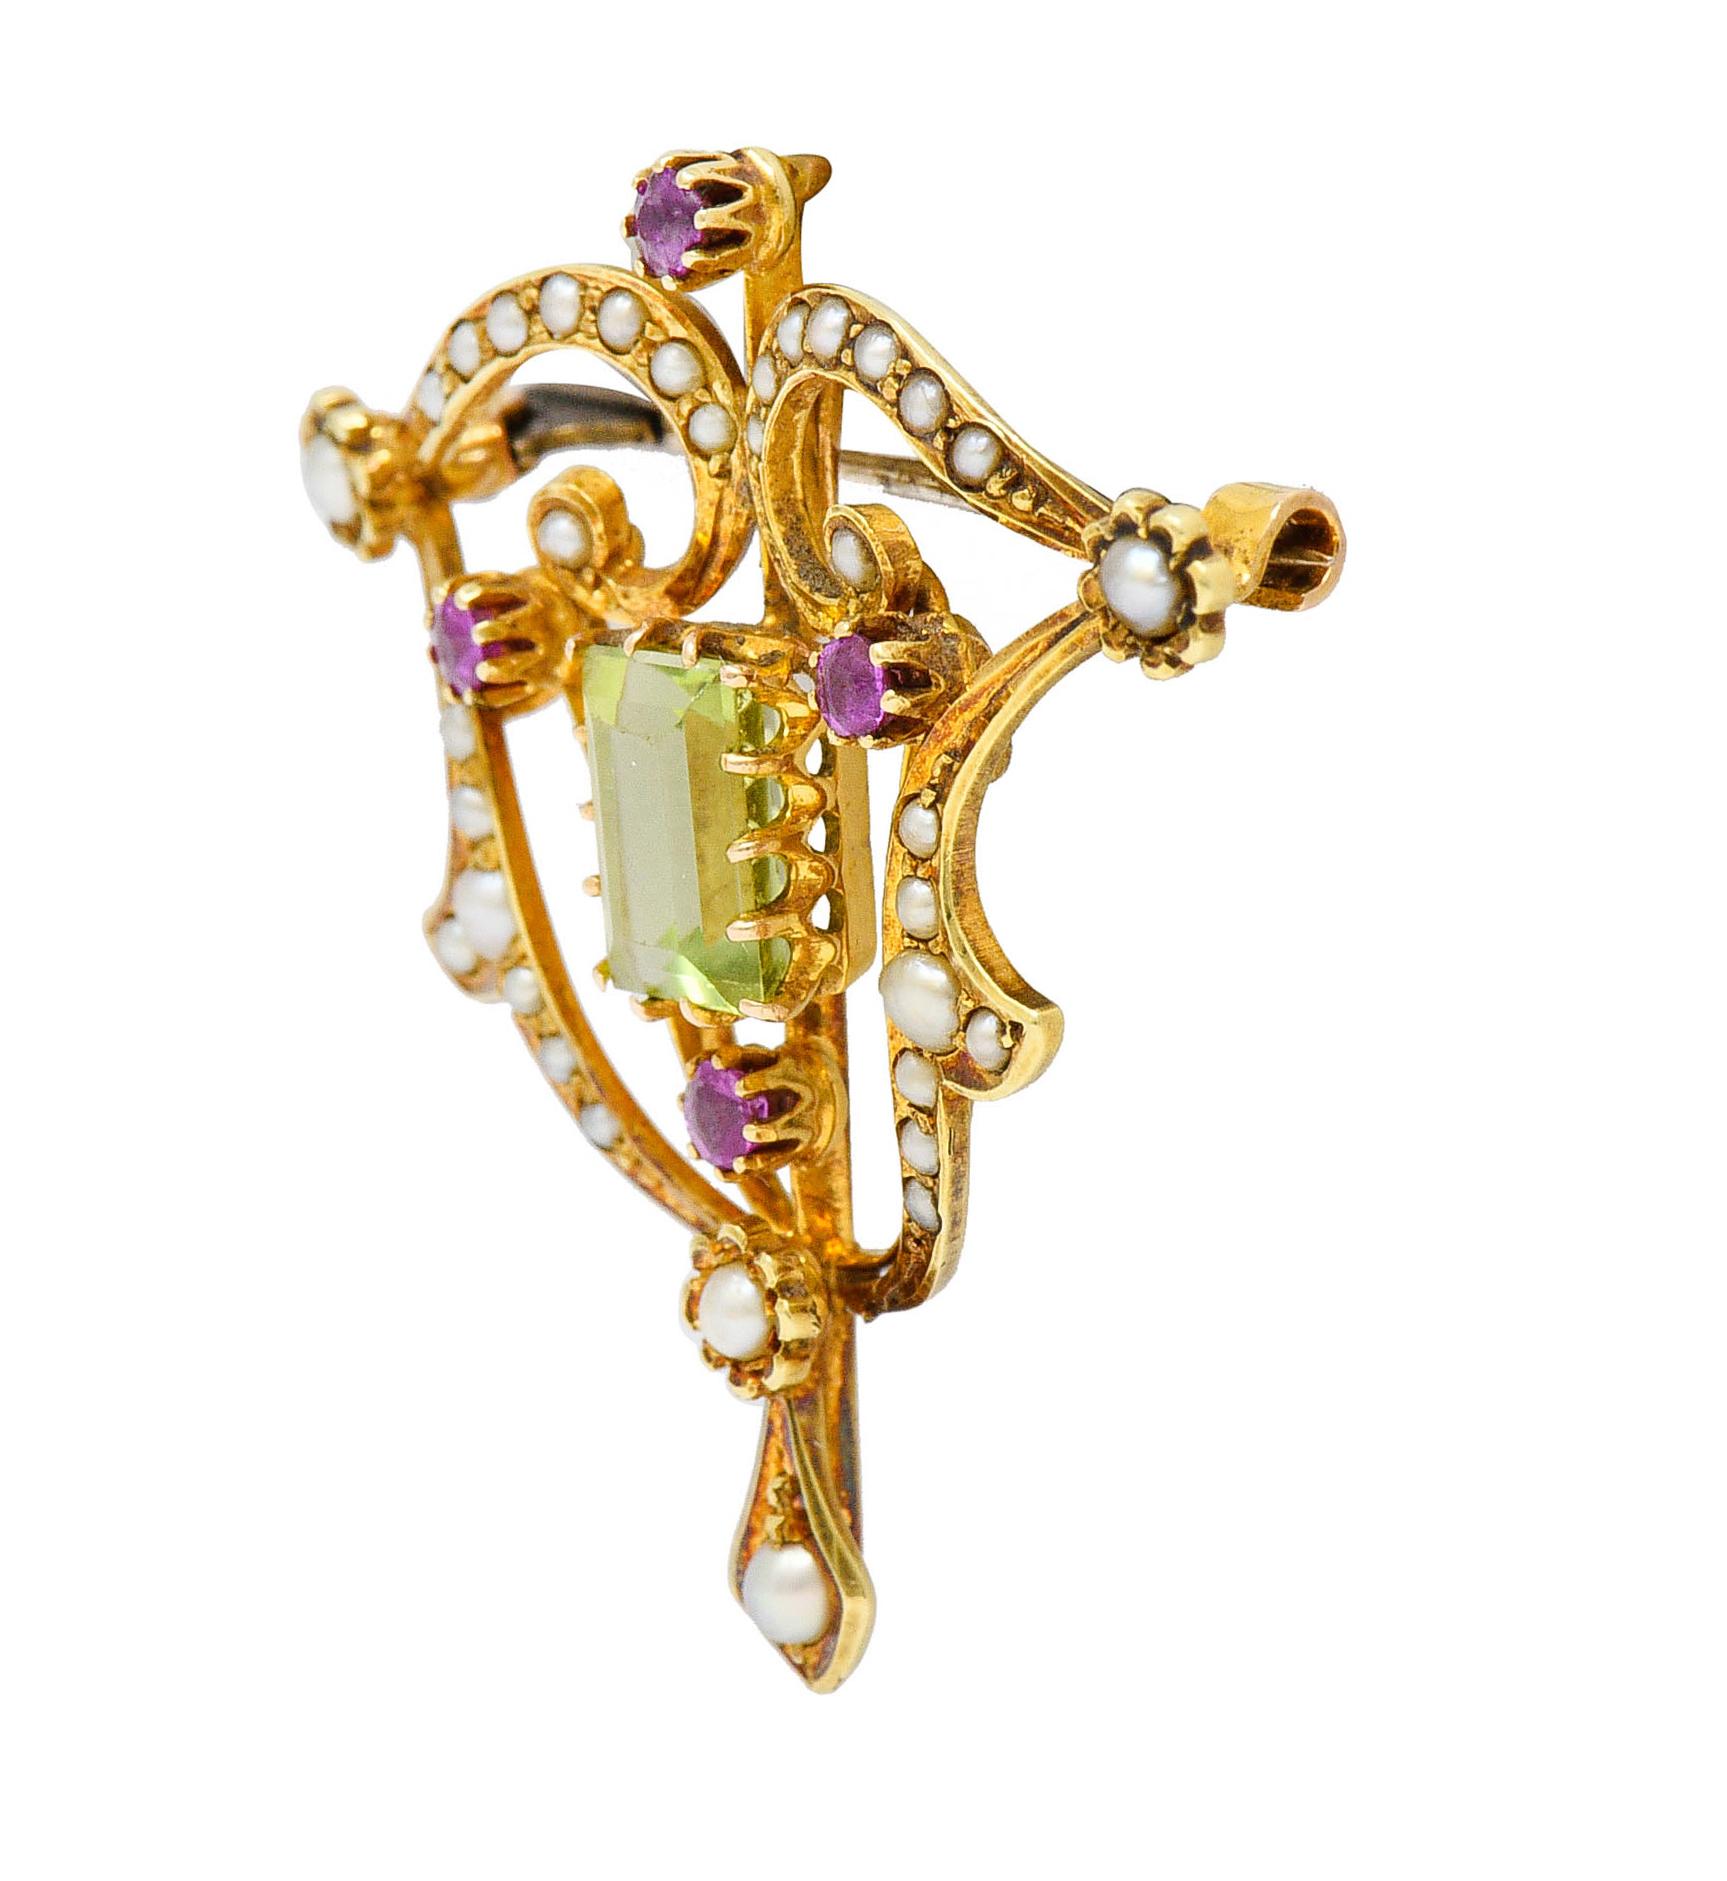 Pendant brooch is designed as scrolling whiplash and floral stations

Centering a rectangular step cut peridot weighing approximately 2.70 carats - bright yellowish green

With four round cut ruby accents weighing in total approximately 0.25 carat -